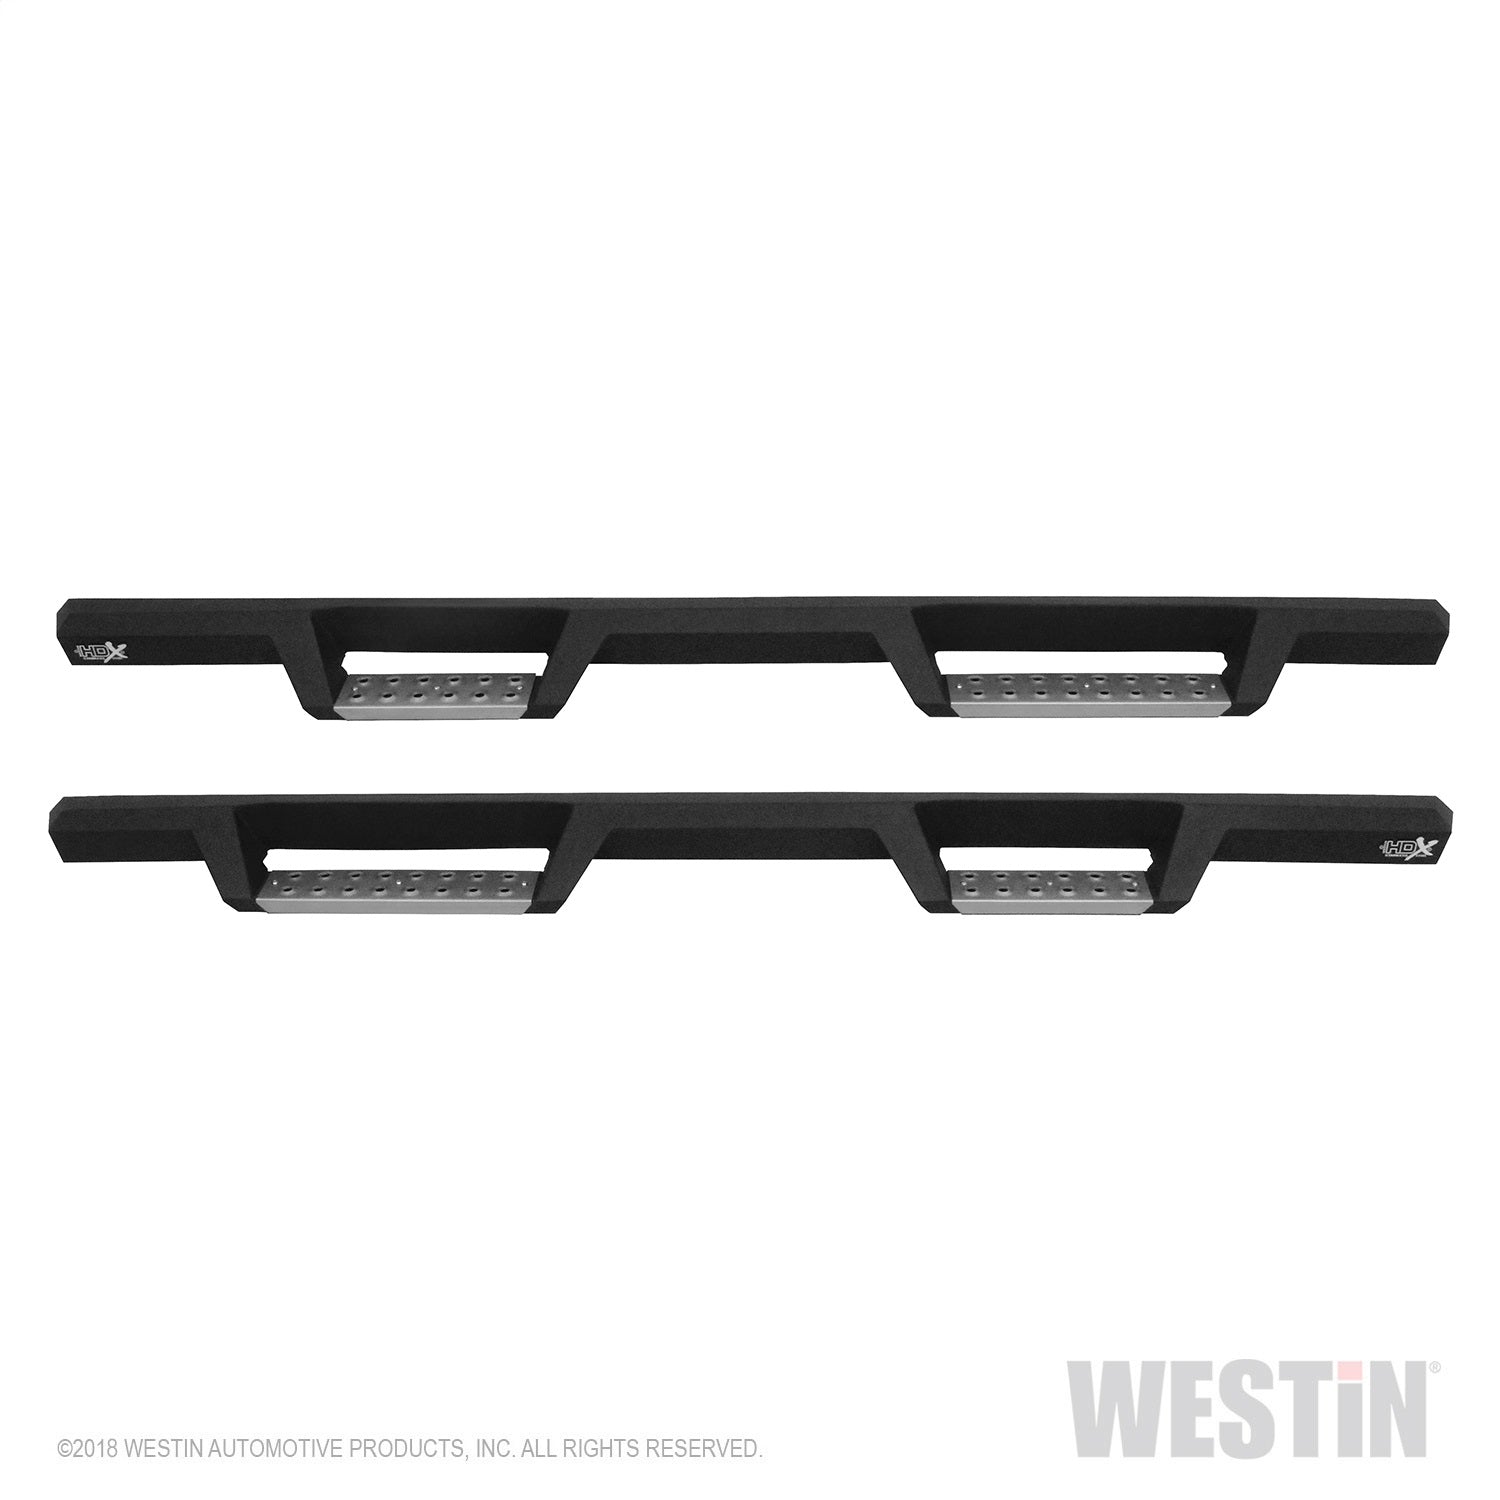 Westin 56-132552 HDX Stainless Drop Nerf Step Bars Fits 07-21 Tundra